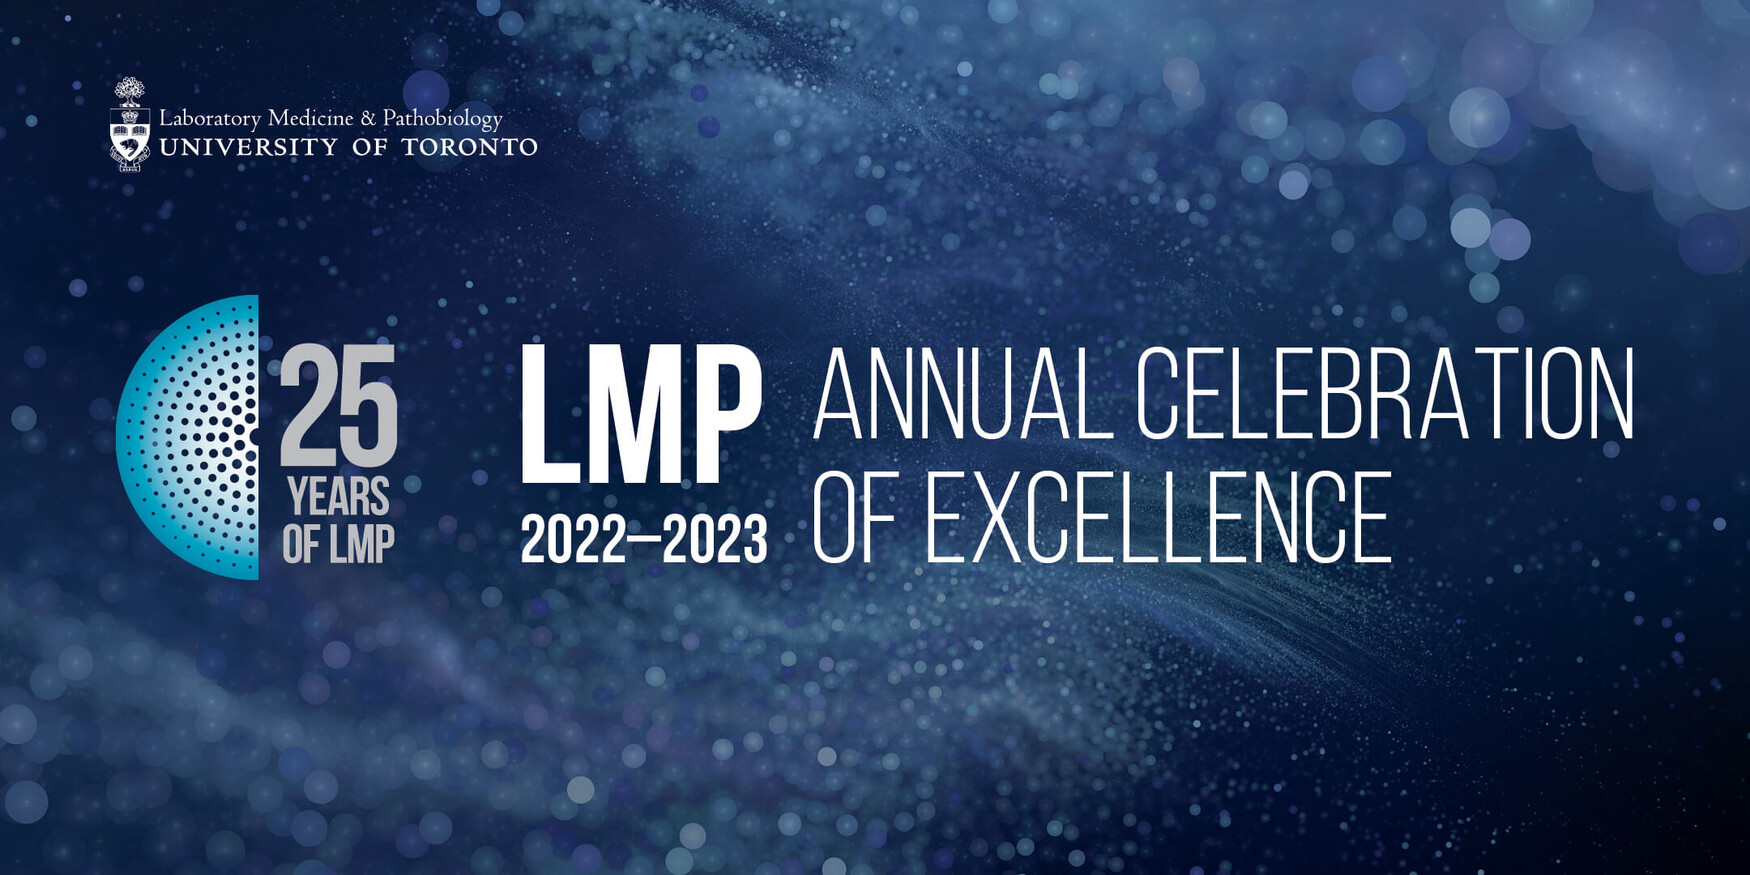 LMP annual celebration of excellence